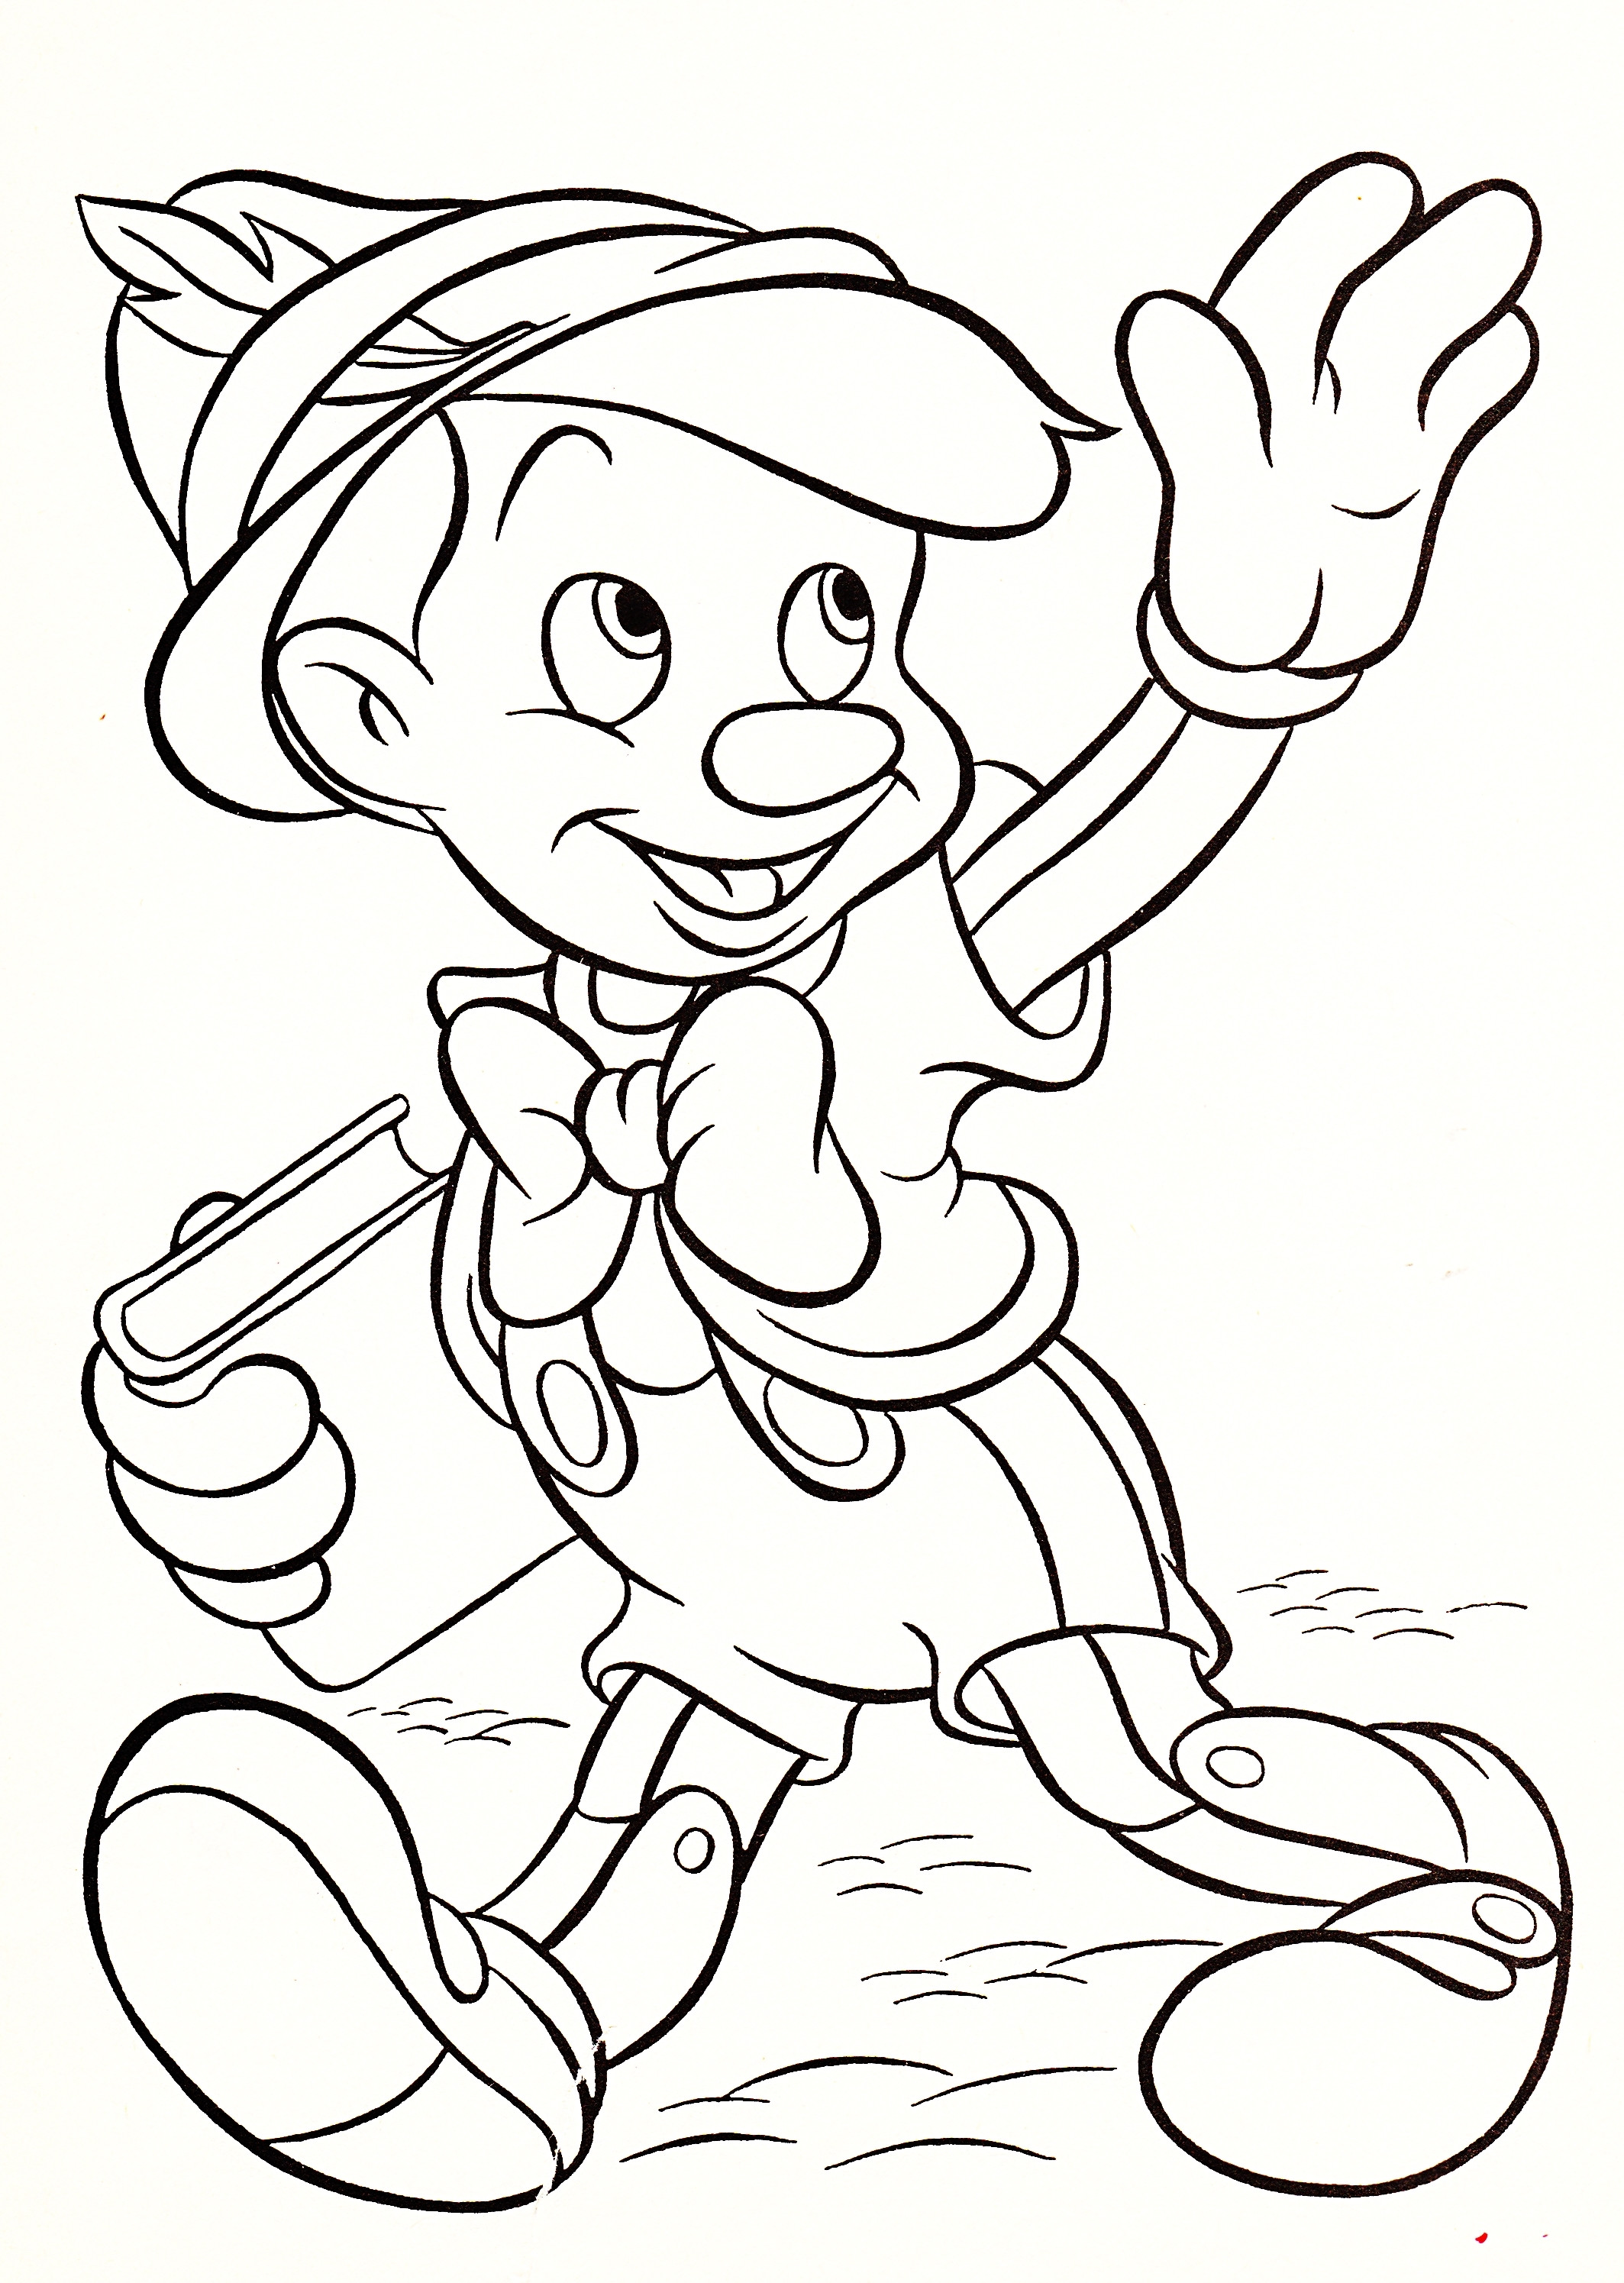 Print Free Coloring Pages Disney
 Colouring Pages Disney Characters Printable The Color Panda